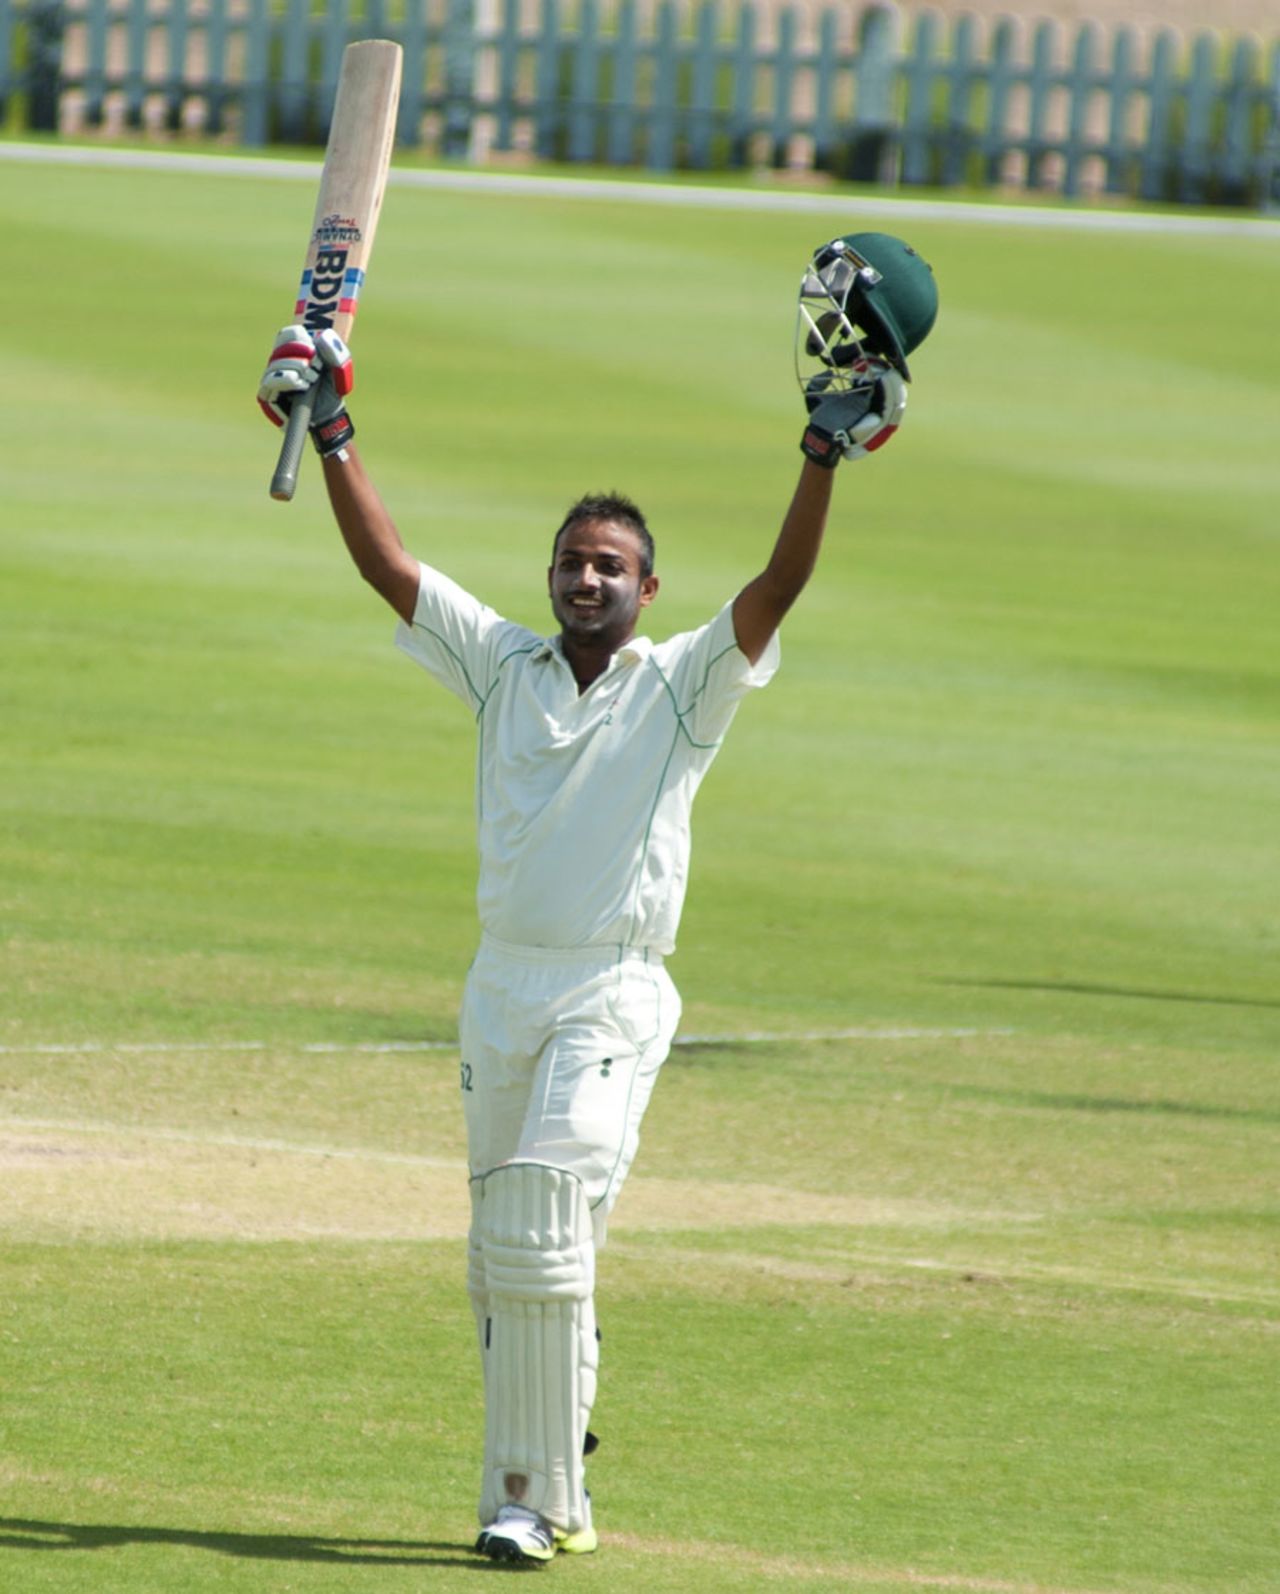 Rakep Patel celebrates his maiden first-class century, Canada v Kenya, ICC Intercontinental Cup, Sharjah, 3rd day, March 20, 2013